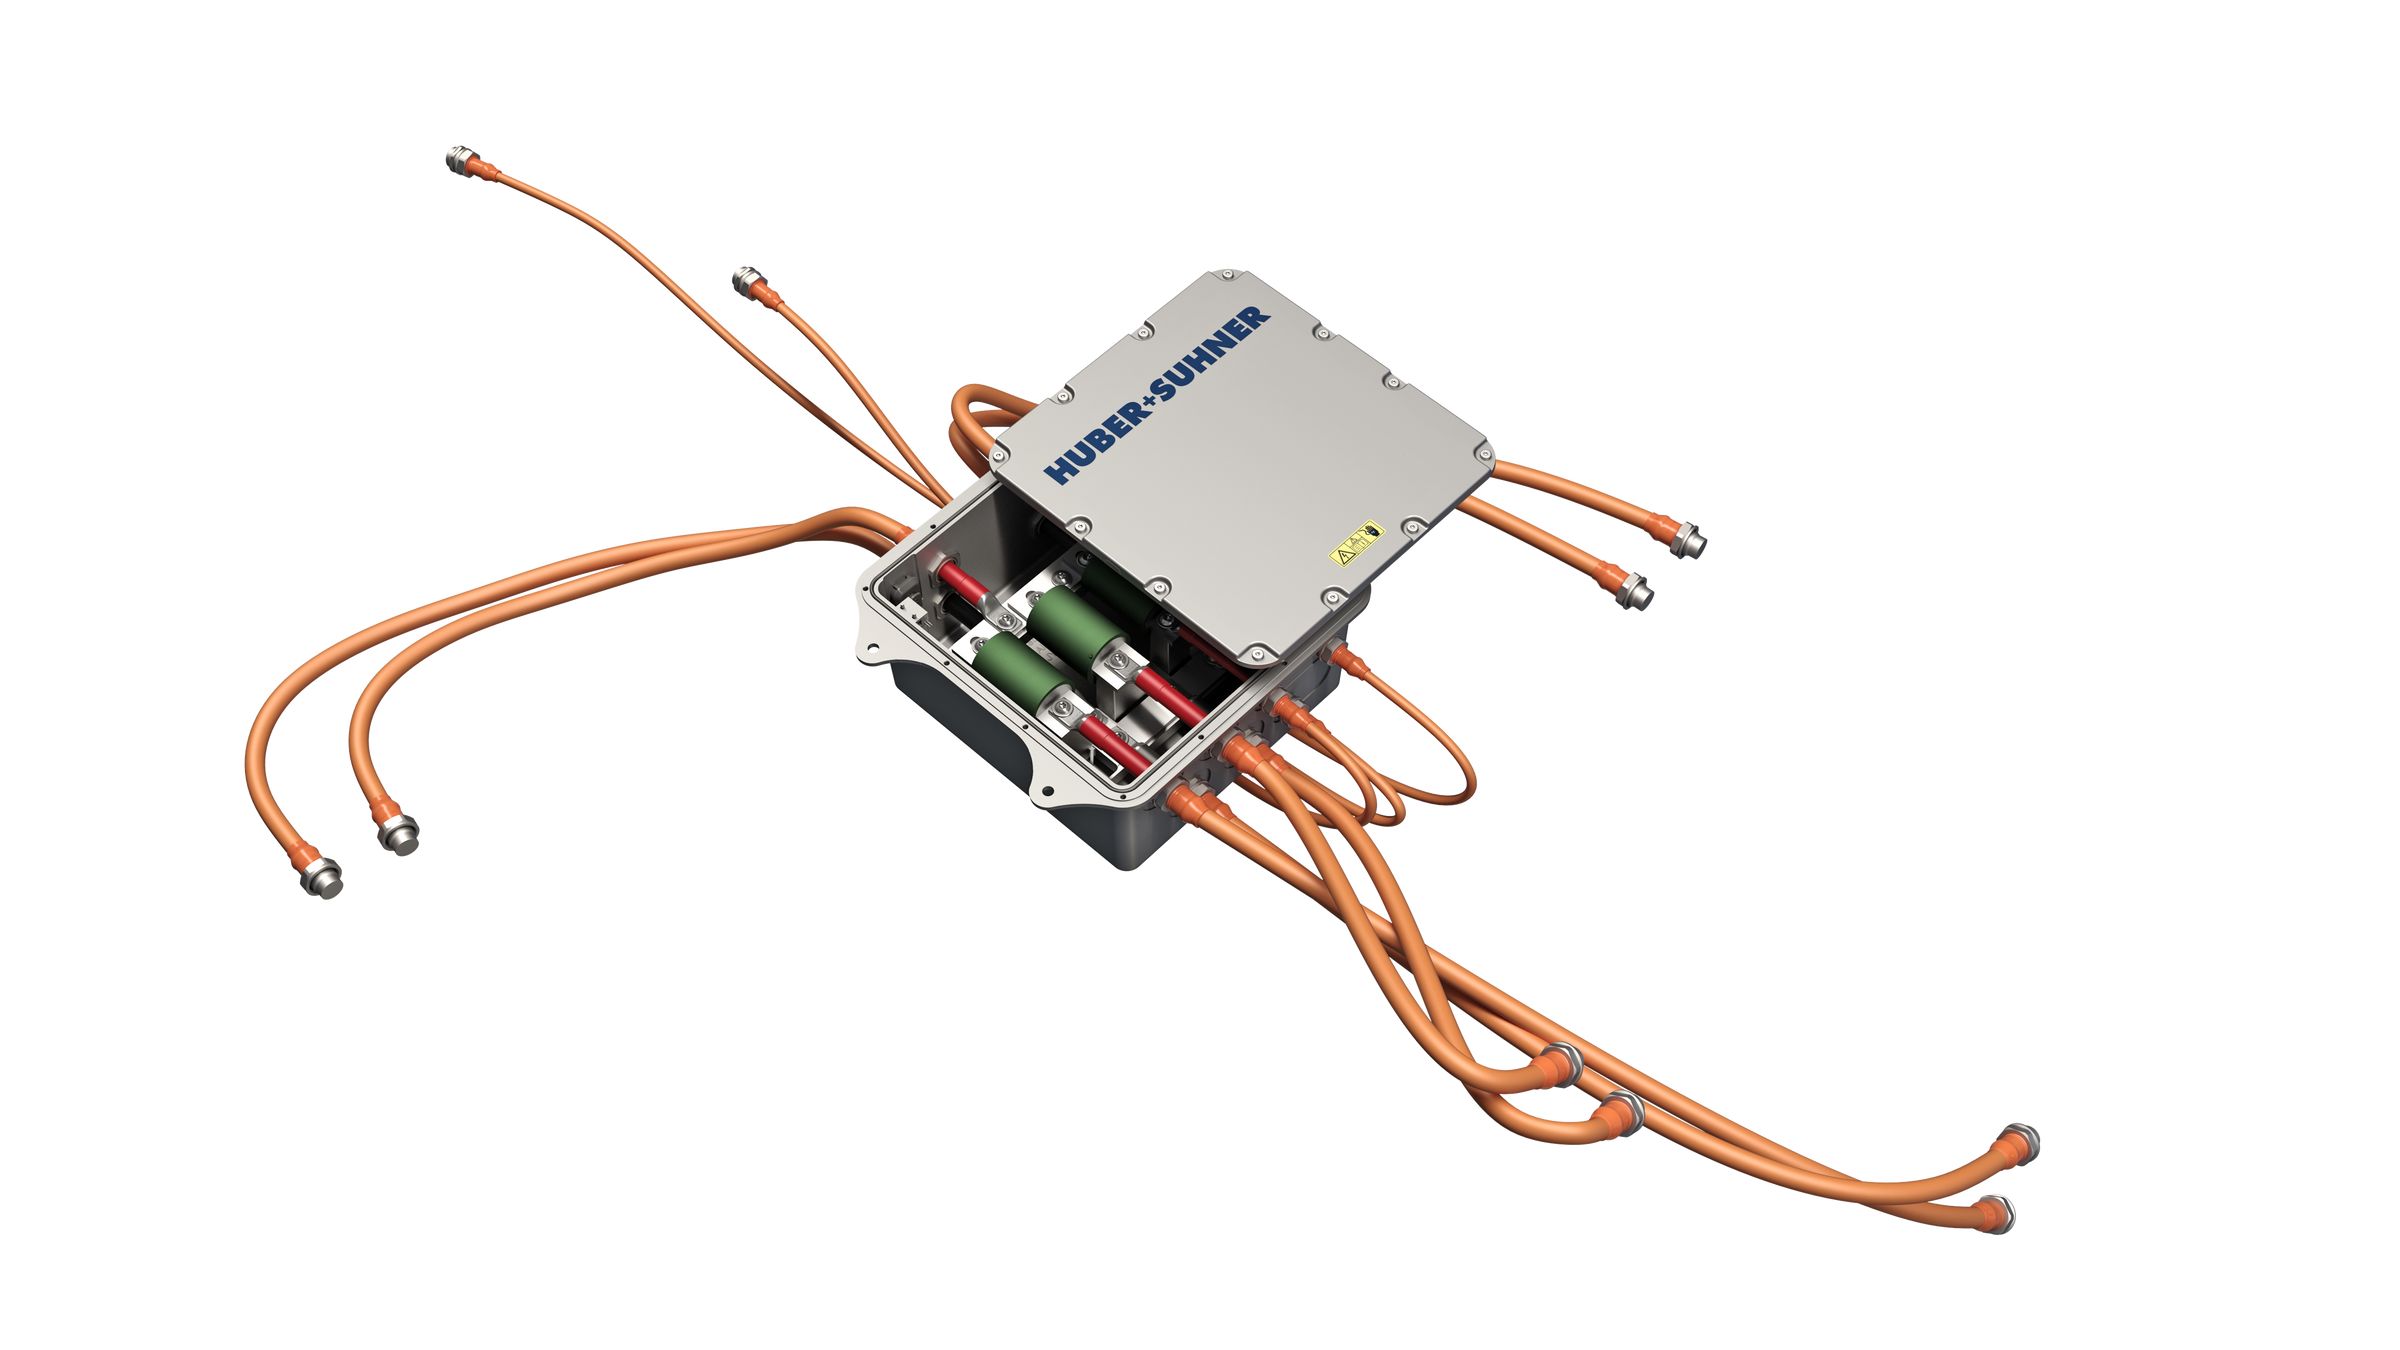 HUBER+SUHNER unveils the most versatile high voltage distribution solution for electric vehicles